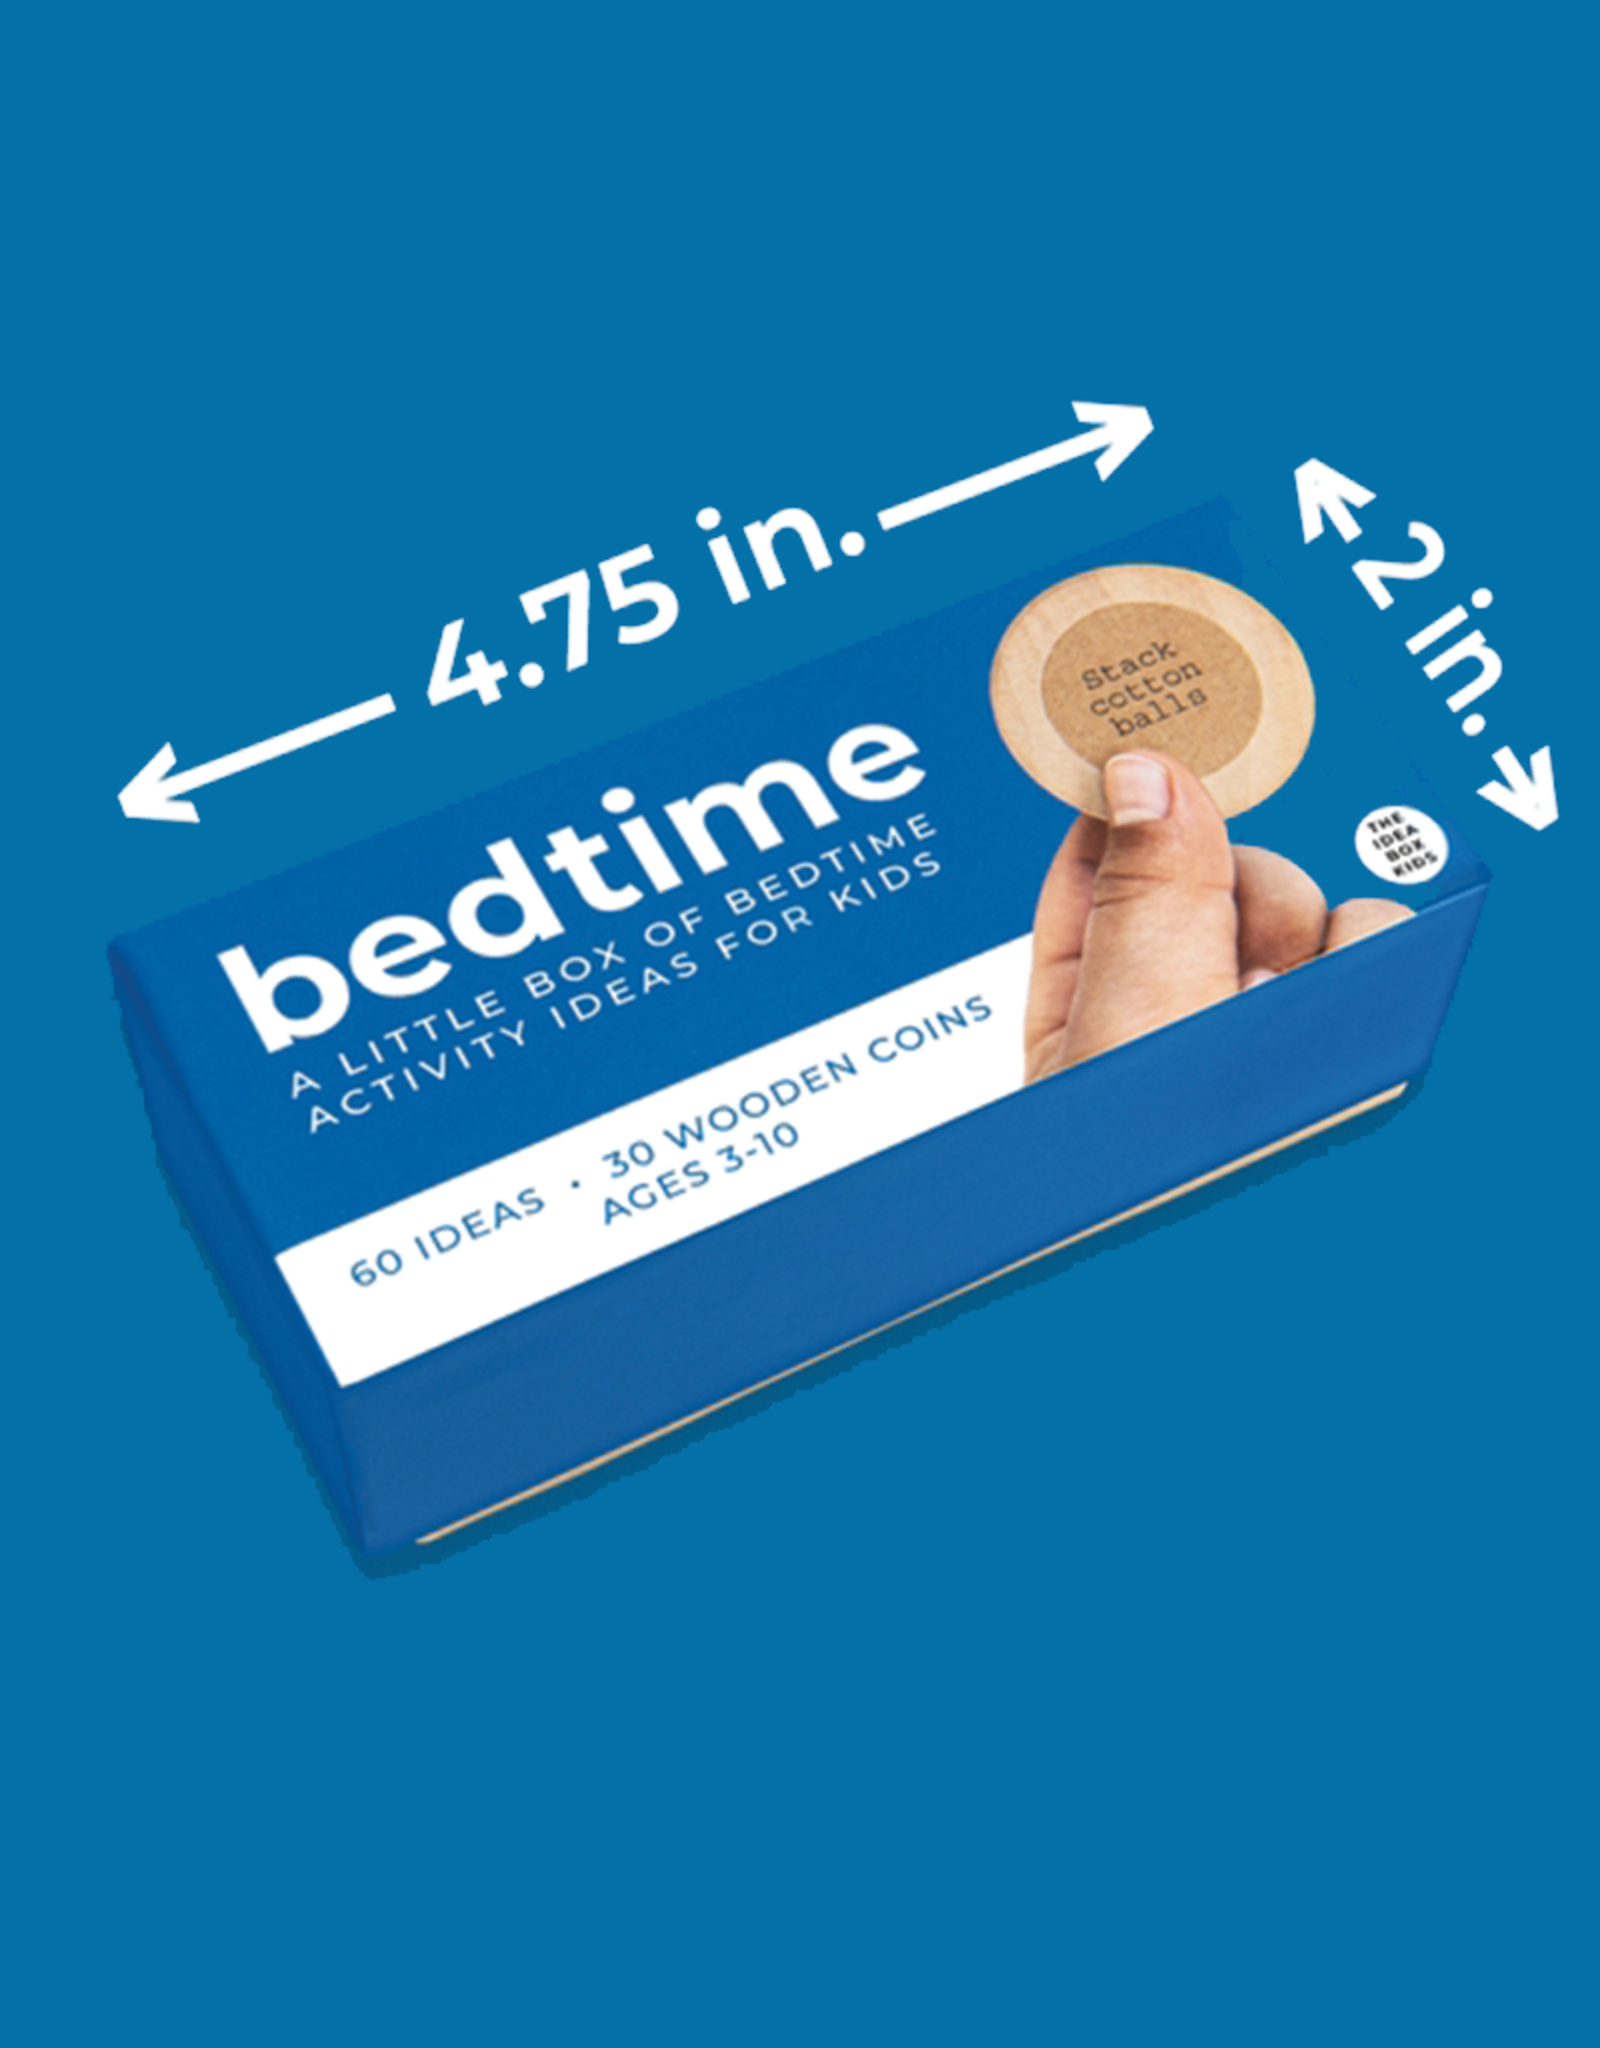 Bedtime in a Box Product Page